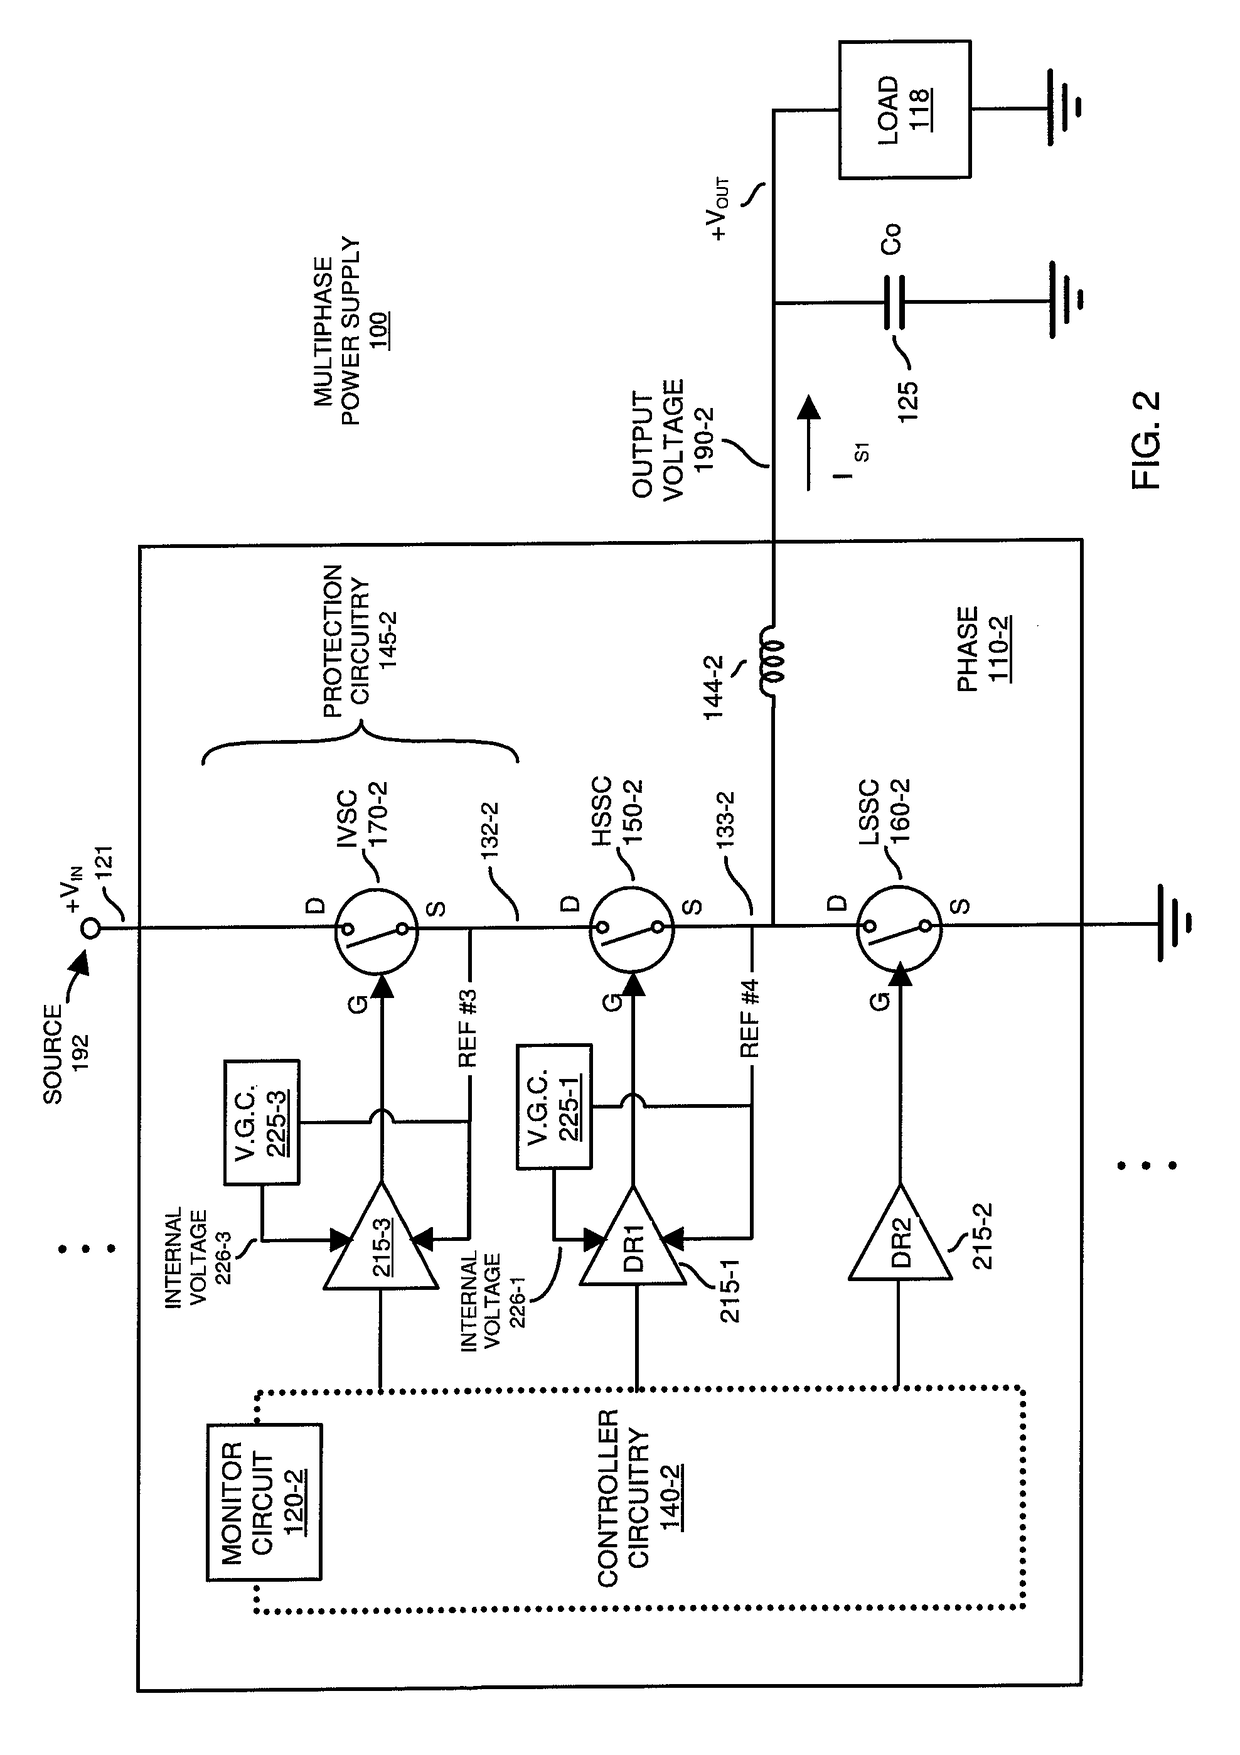 Multiphase power supply and failure mode protection